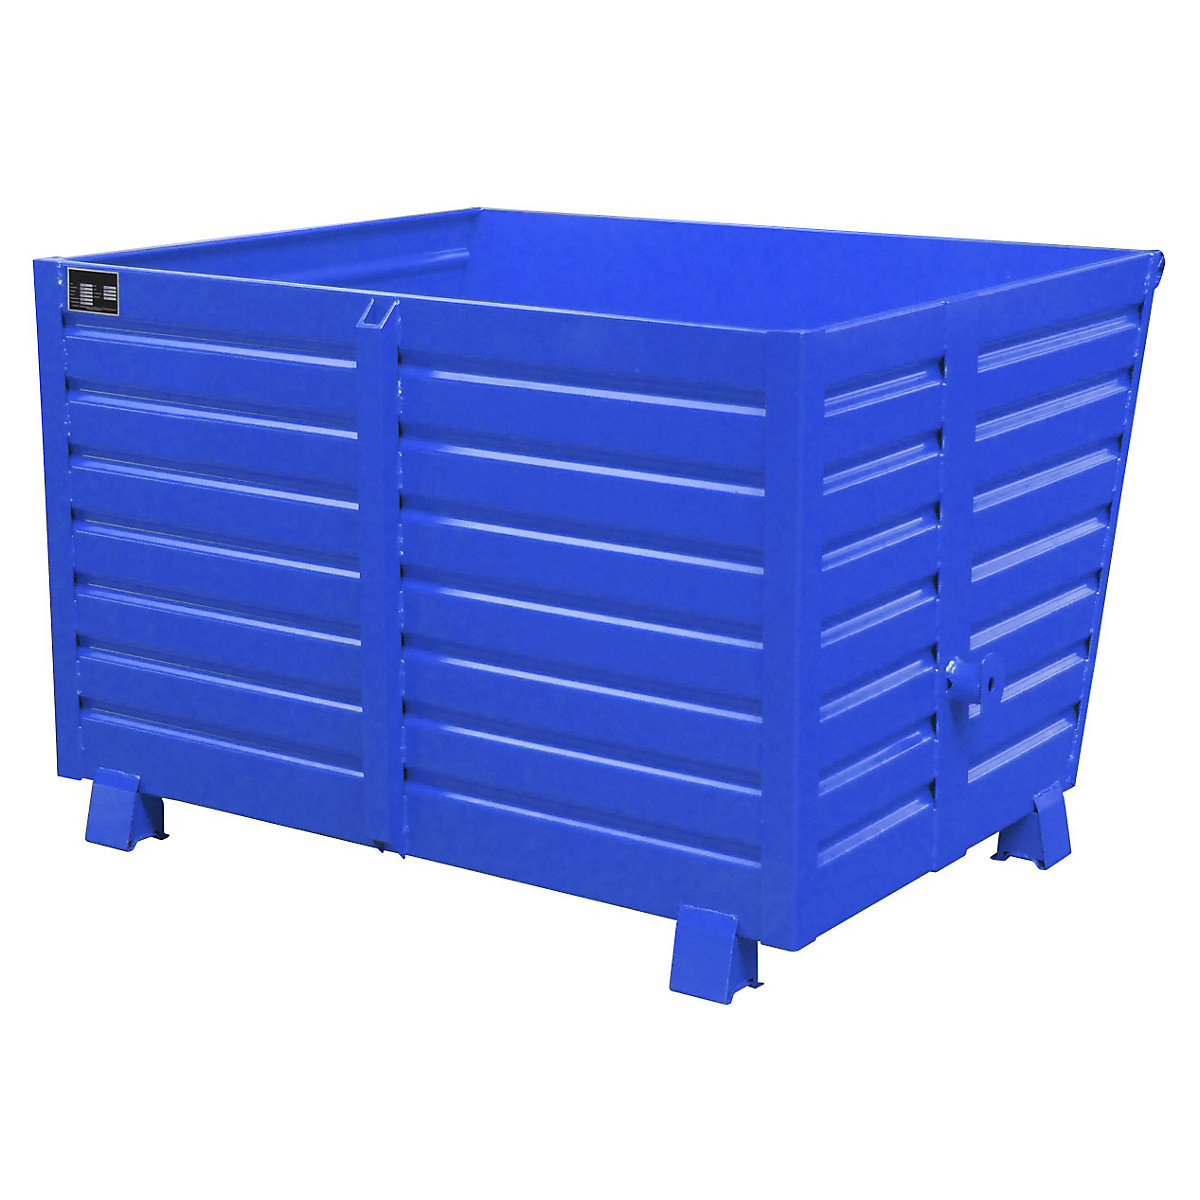 Container basculant – eurokraft pro